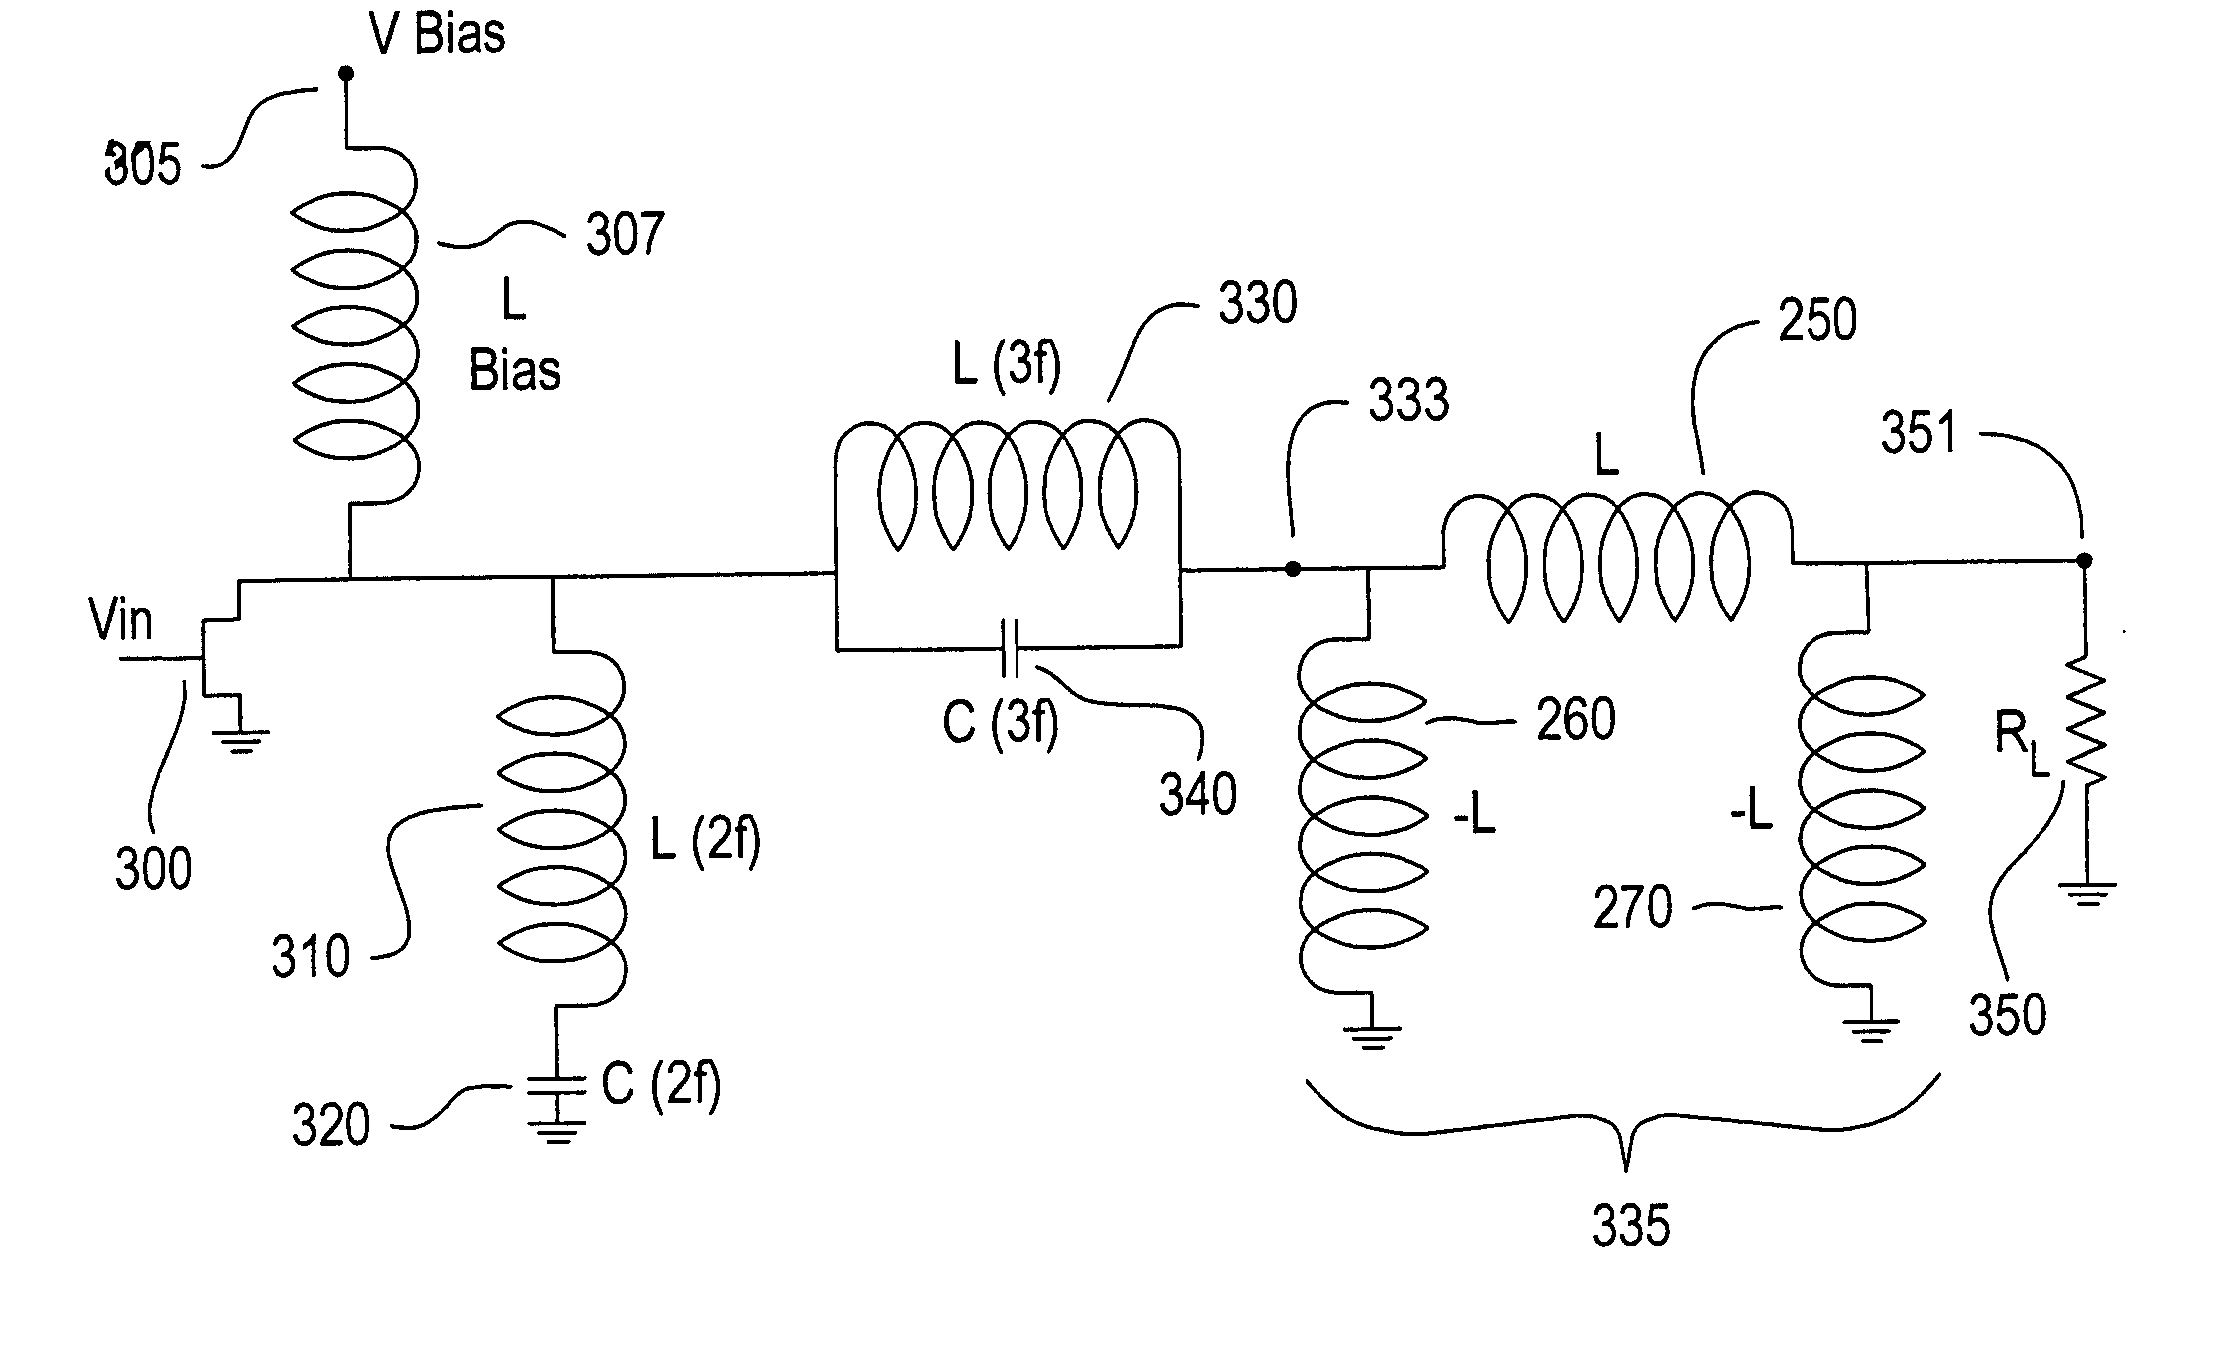 Switched-mode power amplifier using lumped element impedance inverter for parallel combining